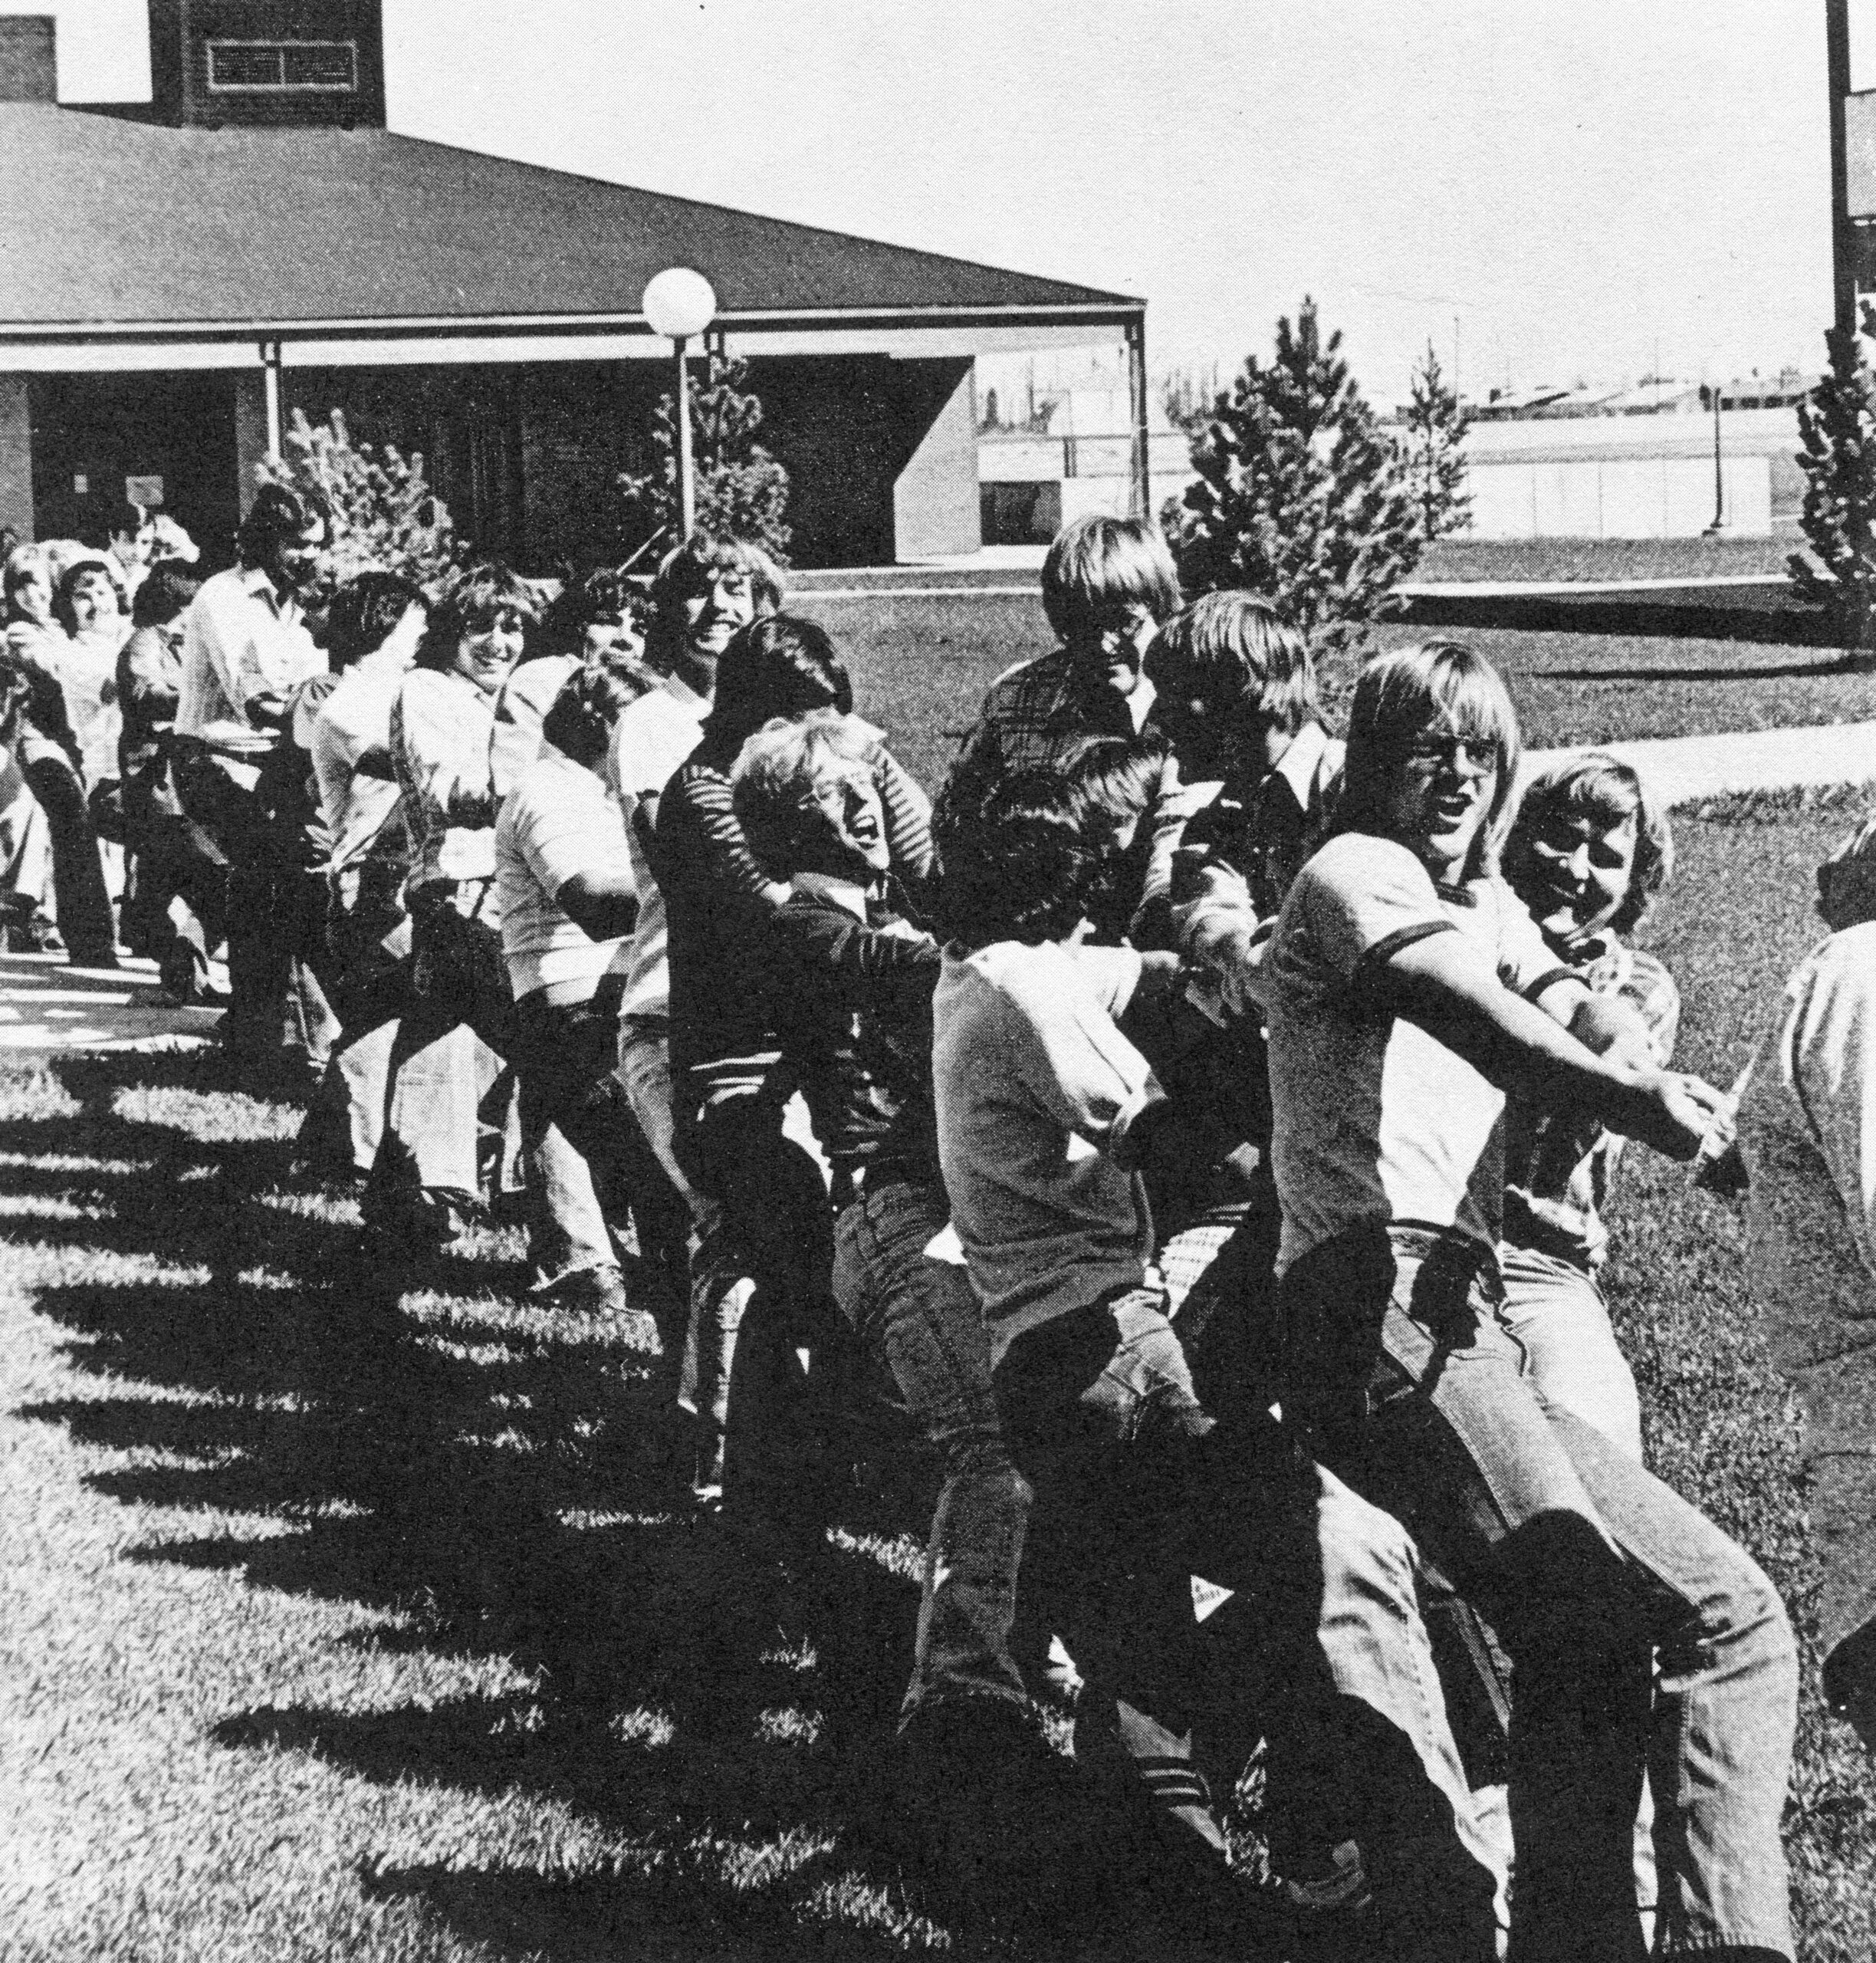 Students compete in a tug-of-war contest south of the Physical Education building during Spring Fling 1976. [College Archives]